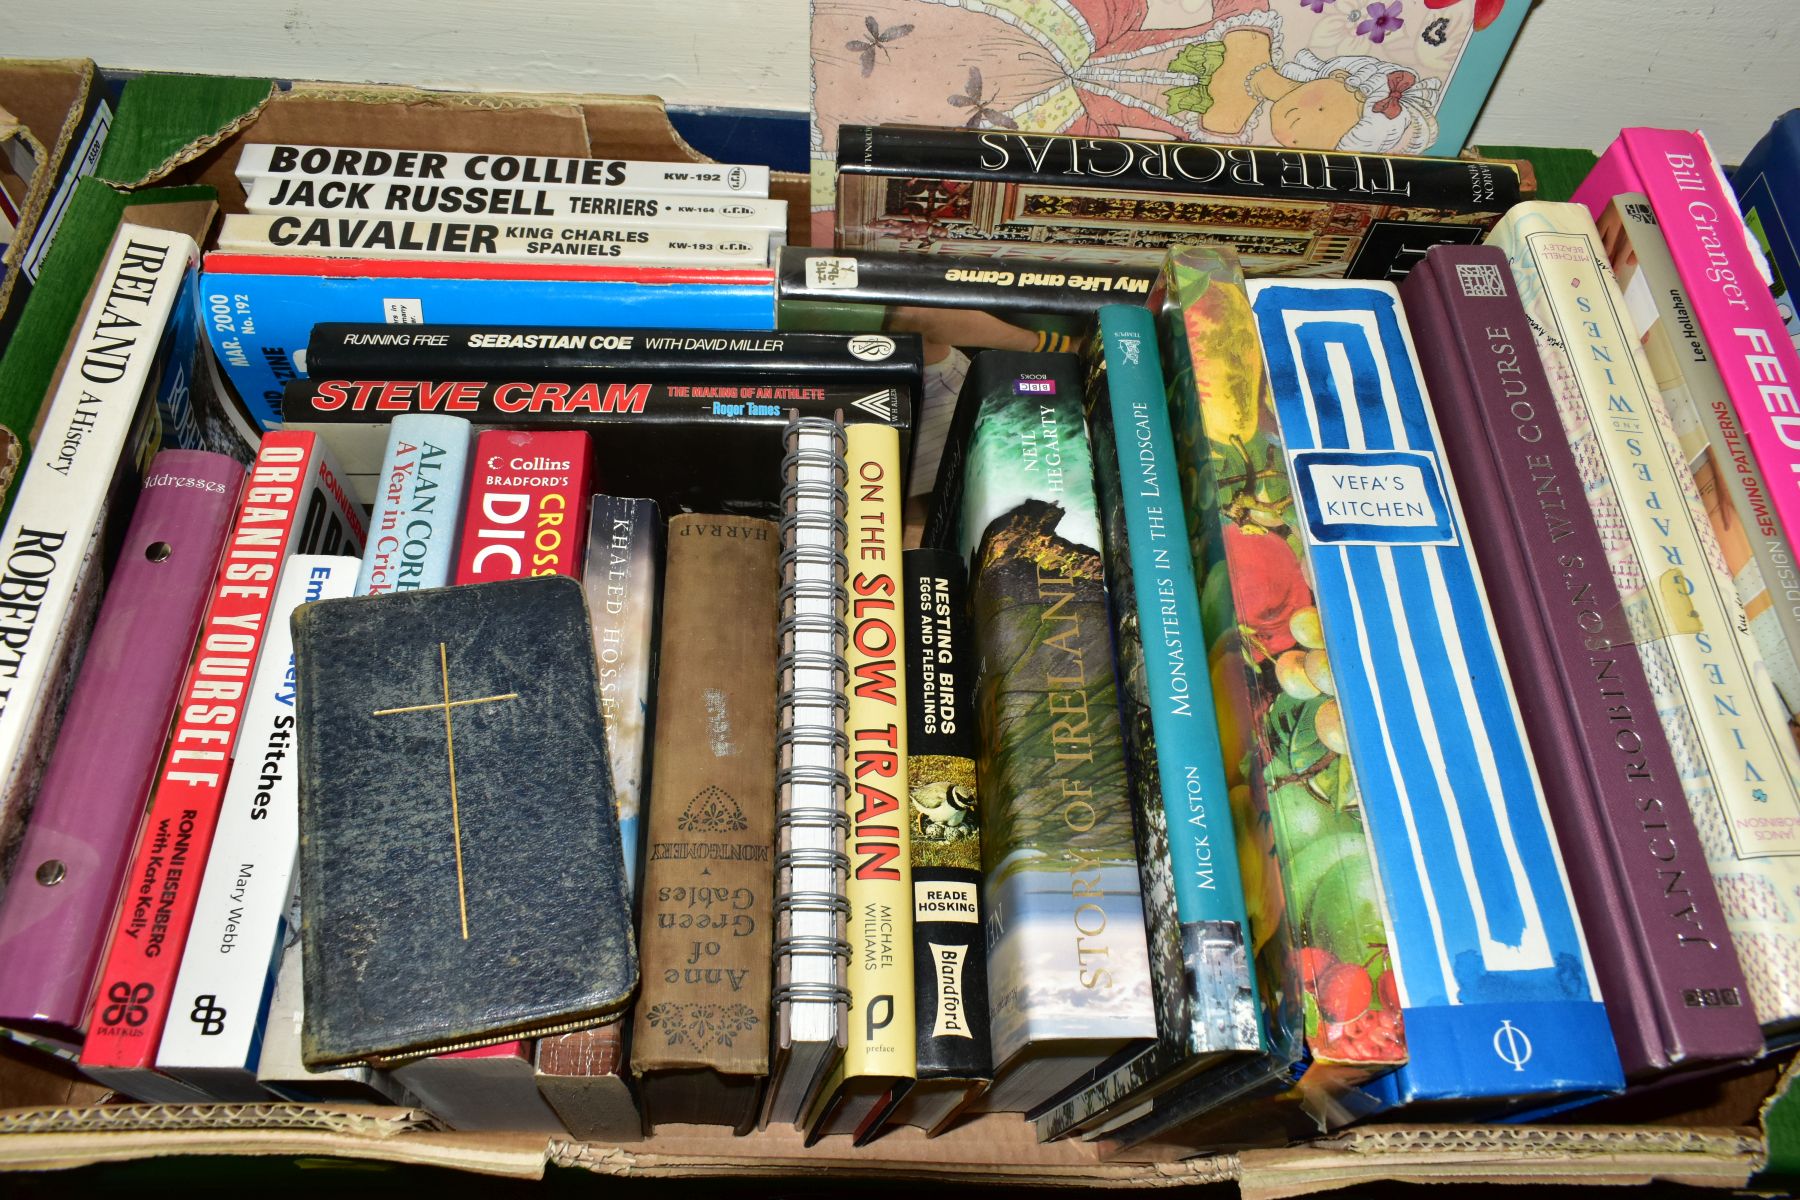 SEVEN BOXES OF BOOKS ETC, subjects include cookery - James Martin, River Cottage, Vefa's Cottage, - Image 7 of 10